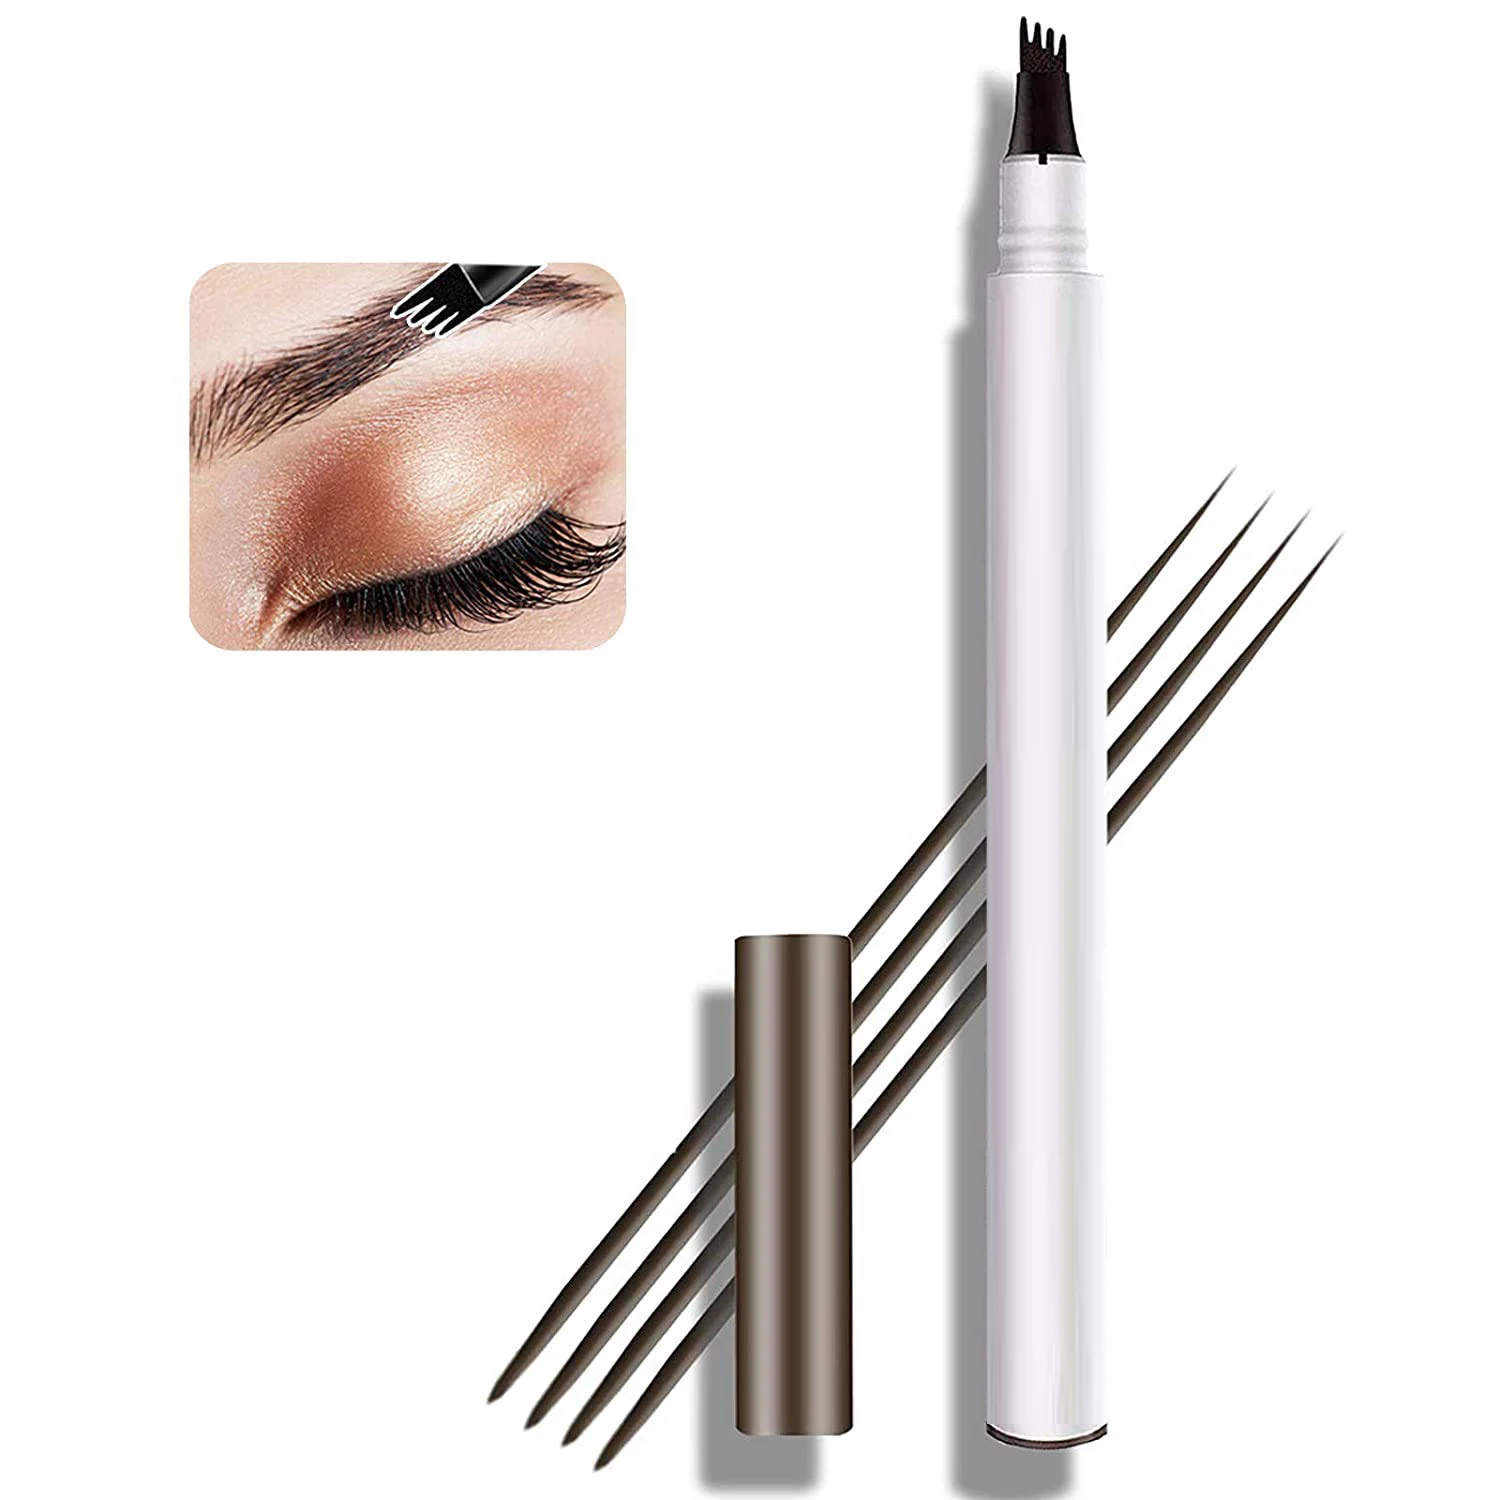 

Waterproof Long-Lasting Private Label Four 4 Tip Microblading Makeup Tint Brow Fork Eyebrow Pencil, 4 colors